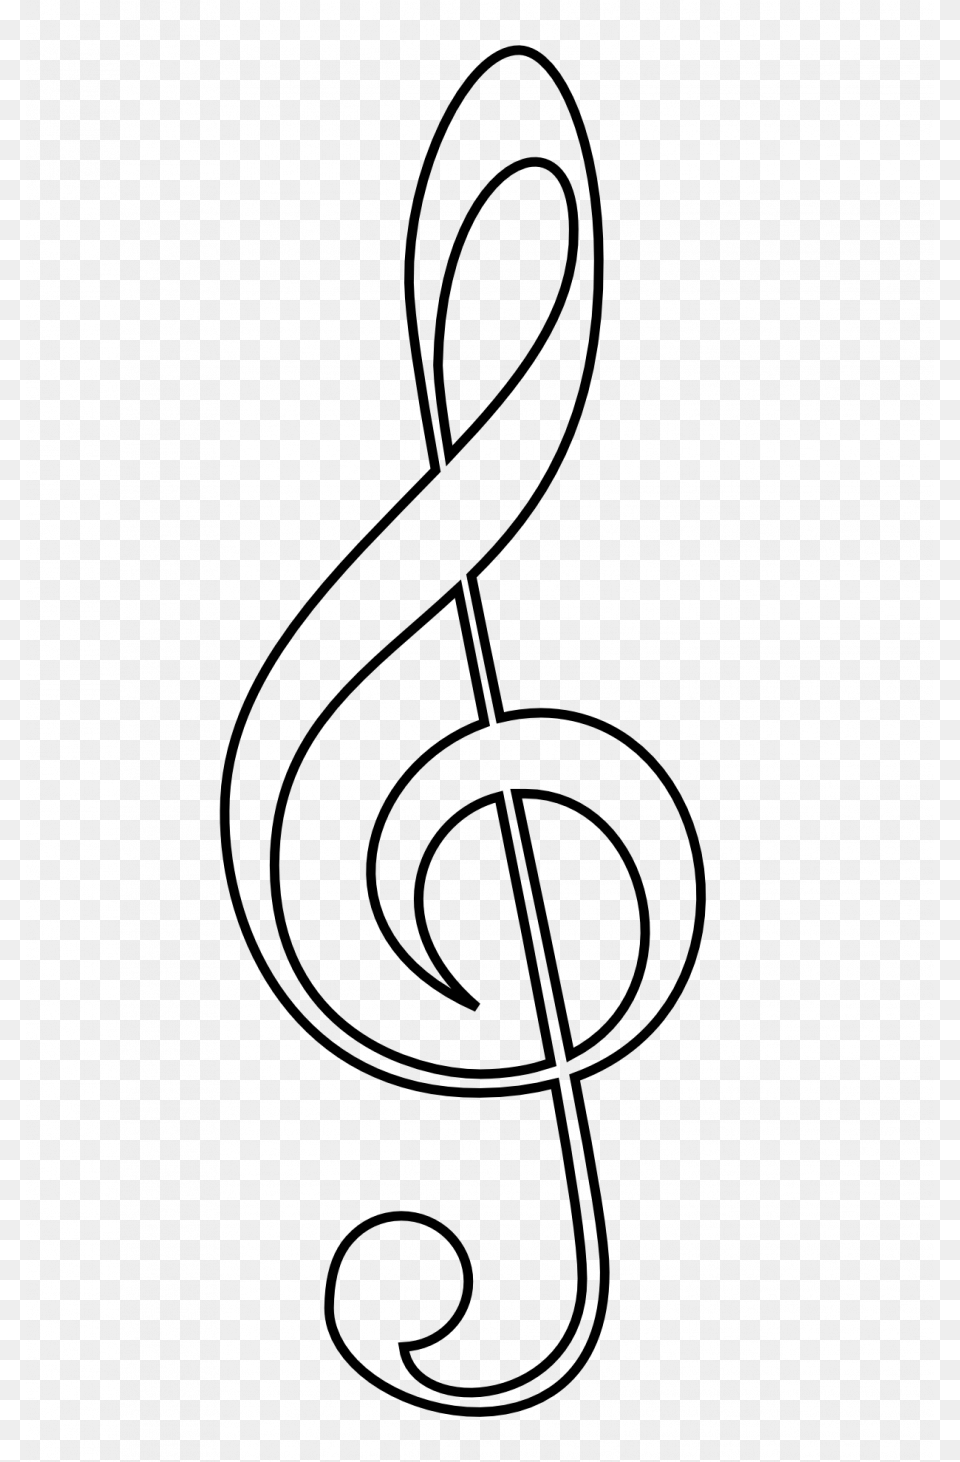 Music Note Cool Drawings Cute In Pencil Tumblr Drawing Music Notes To Colour, Gray Free Png